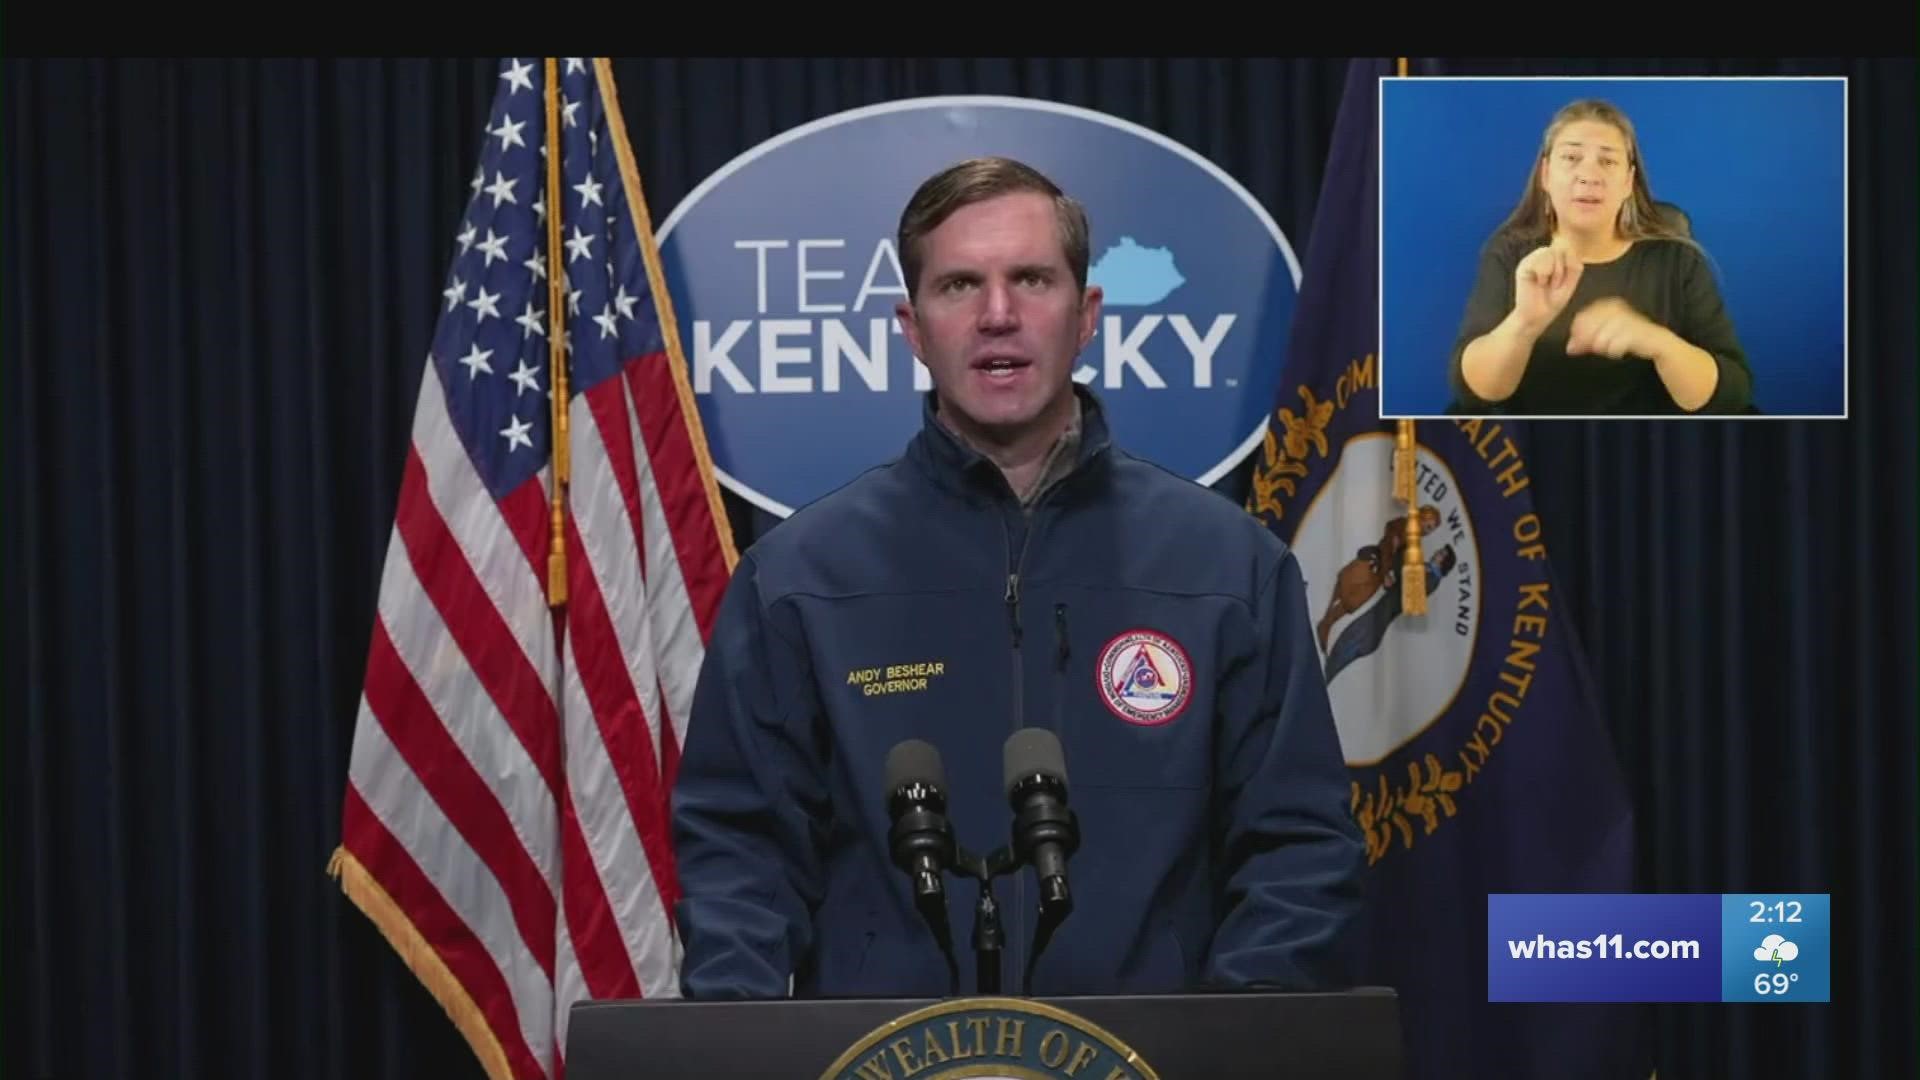 Gov. Beshear has declared a state of emergency after reports of significant tornado damage in multiple Western Kentucky counties.